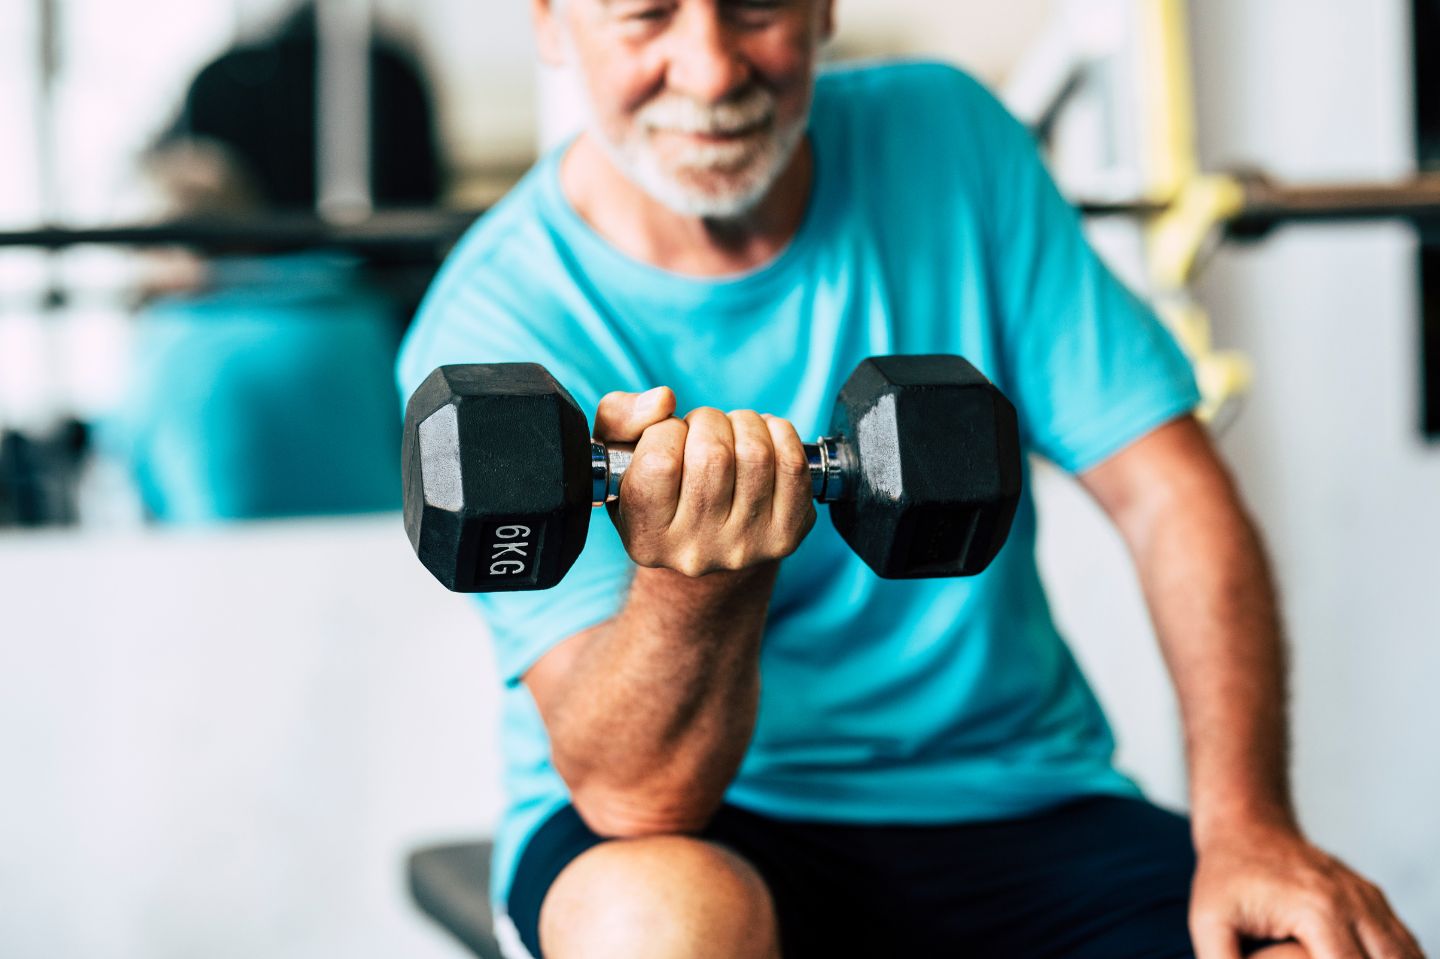 Over 50? Do this 20-minute dumbbell workout to build strength